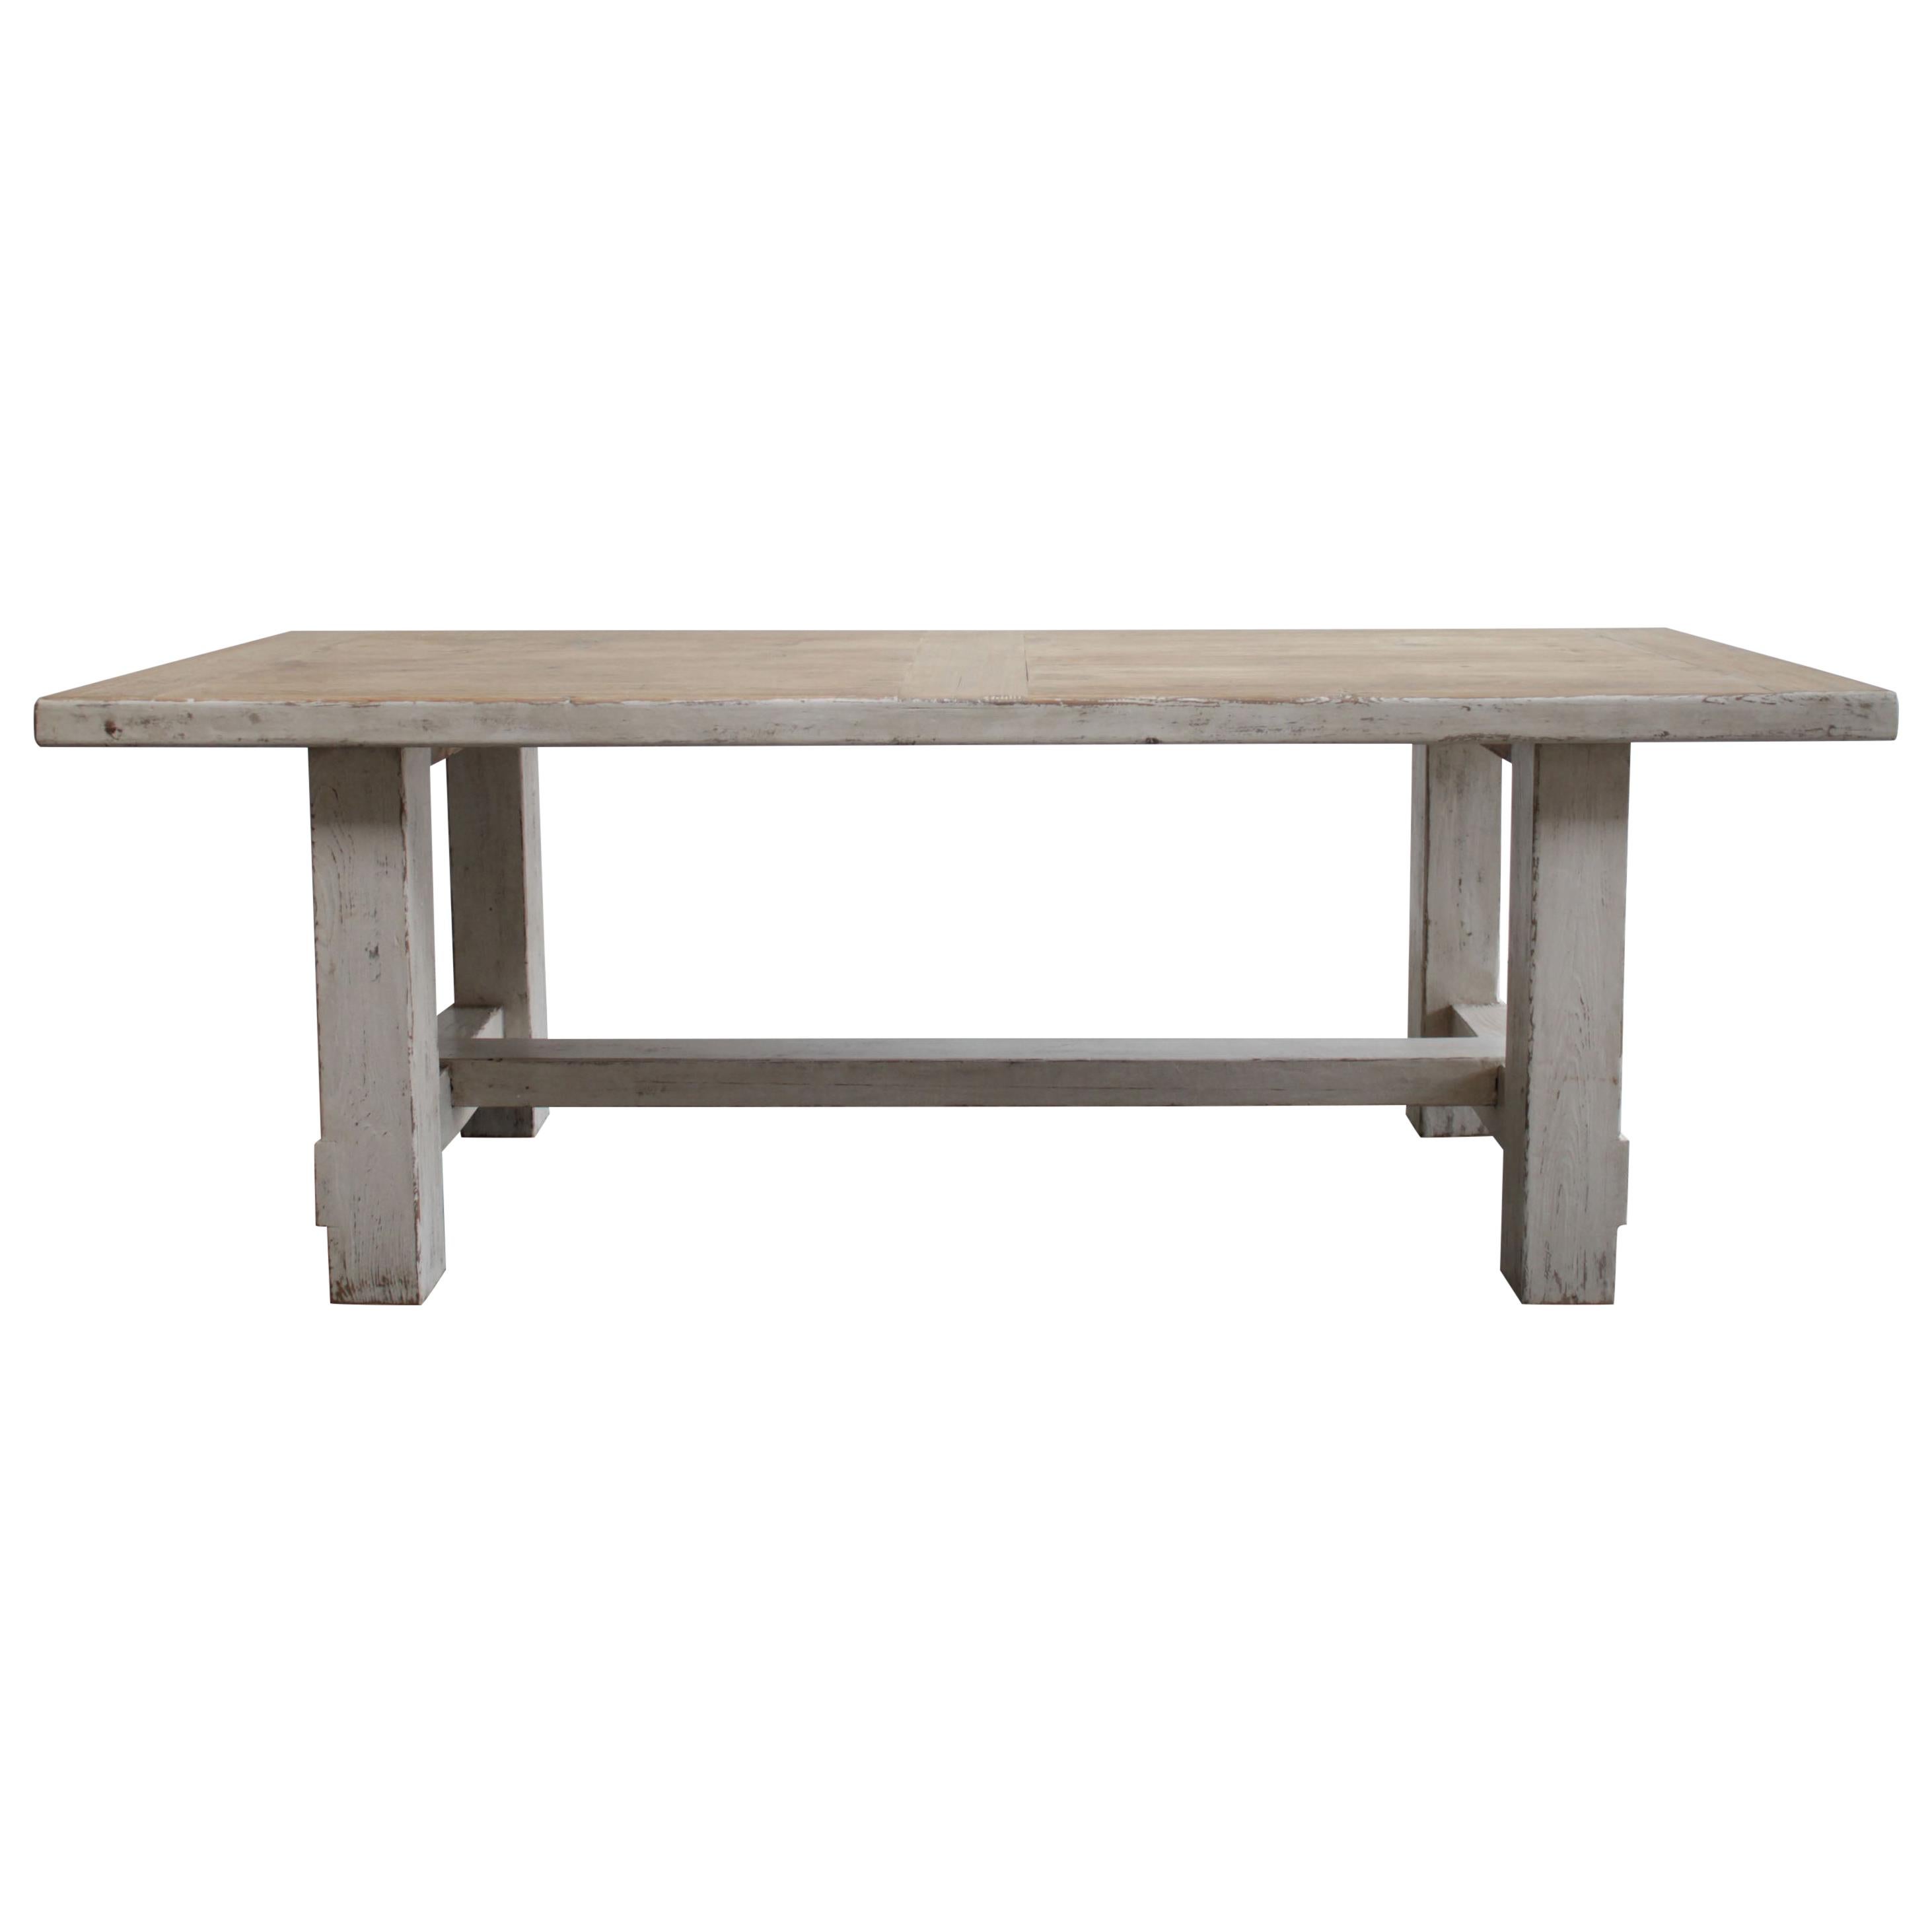 Reclaimed Pine Wood Dining Table with Distressed White Paint For Sale